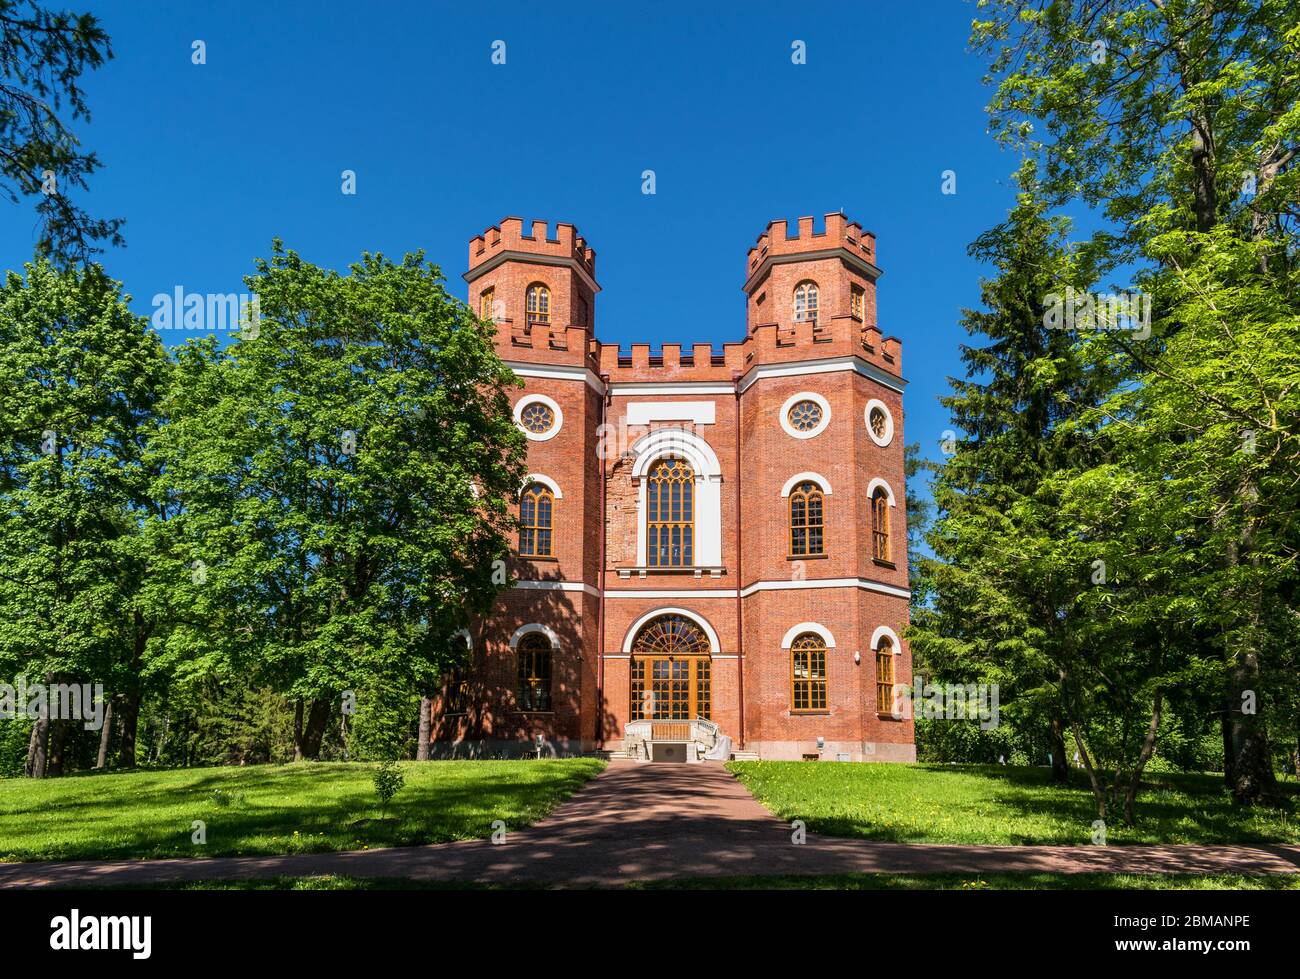 St. Petersburg, Russia, summer 2019: Tsarskoye Selo, Pushkin, Alexander Park, the building of the Arsenal Armory Museum in the style of an English kni Stock Photo